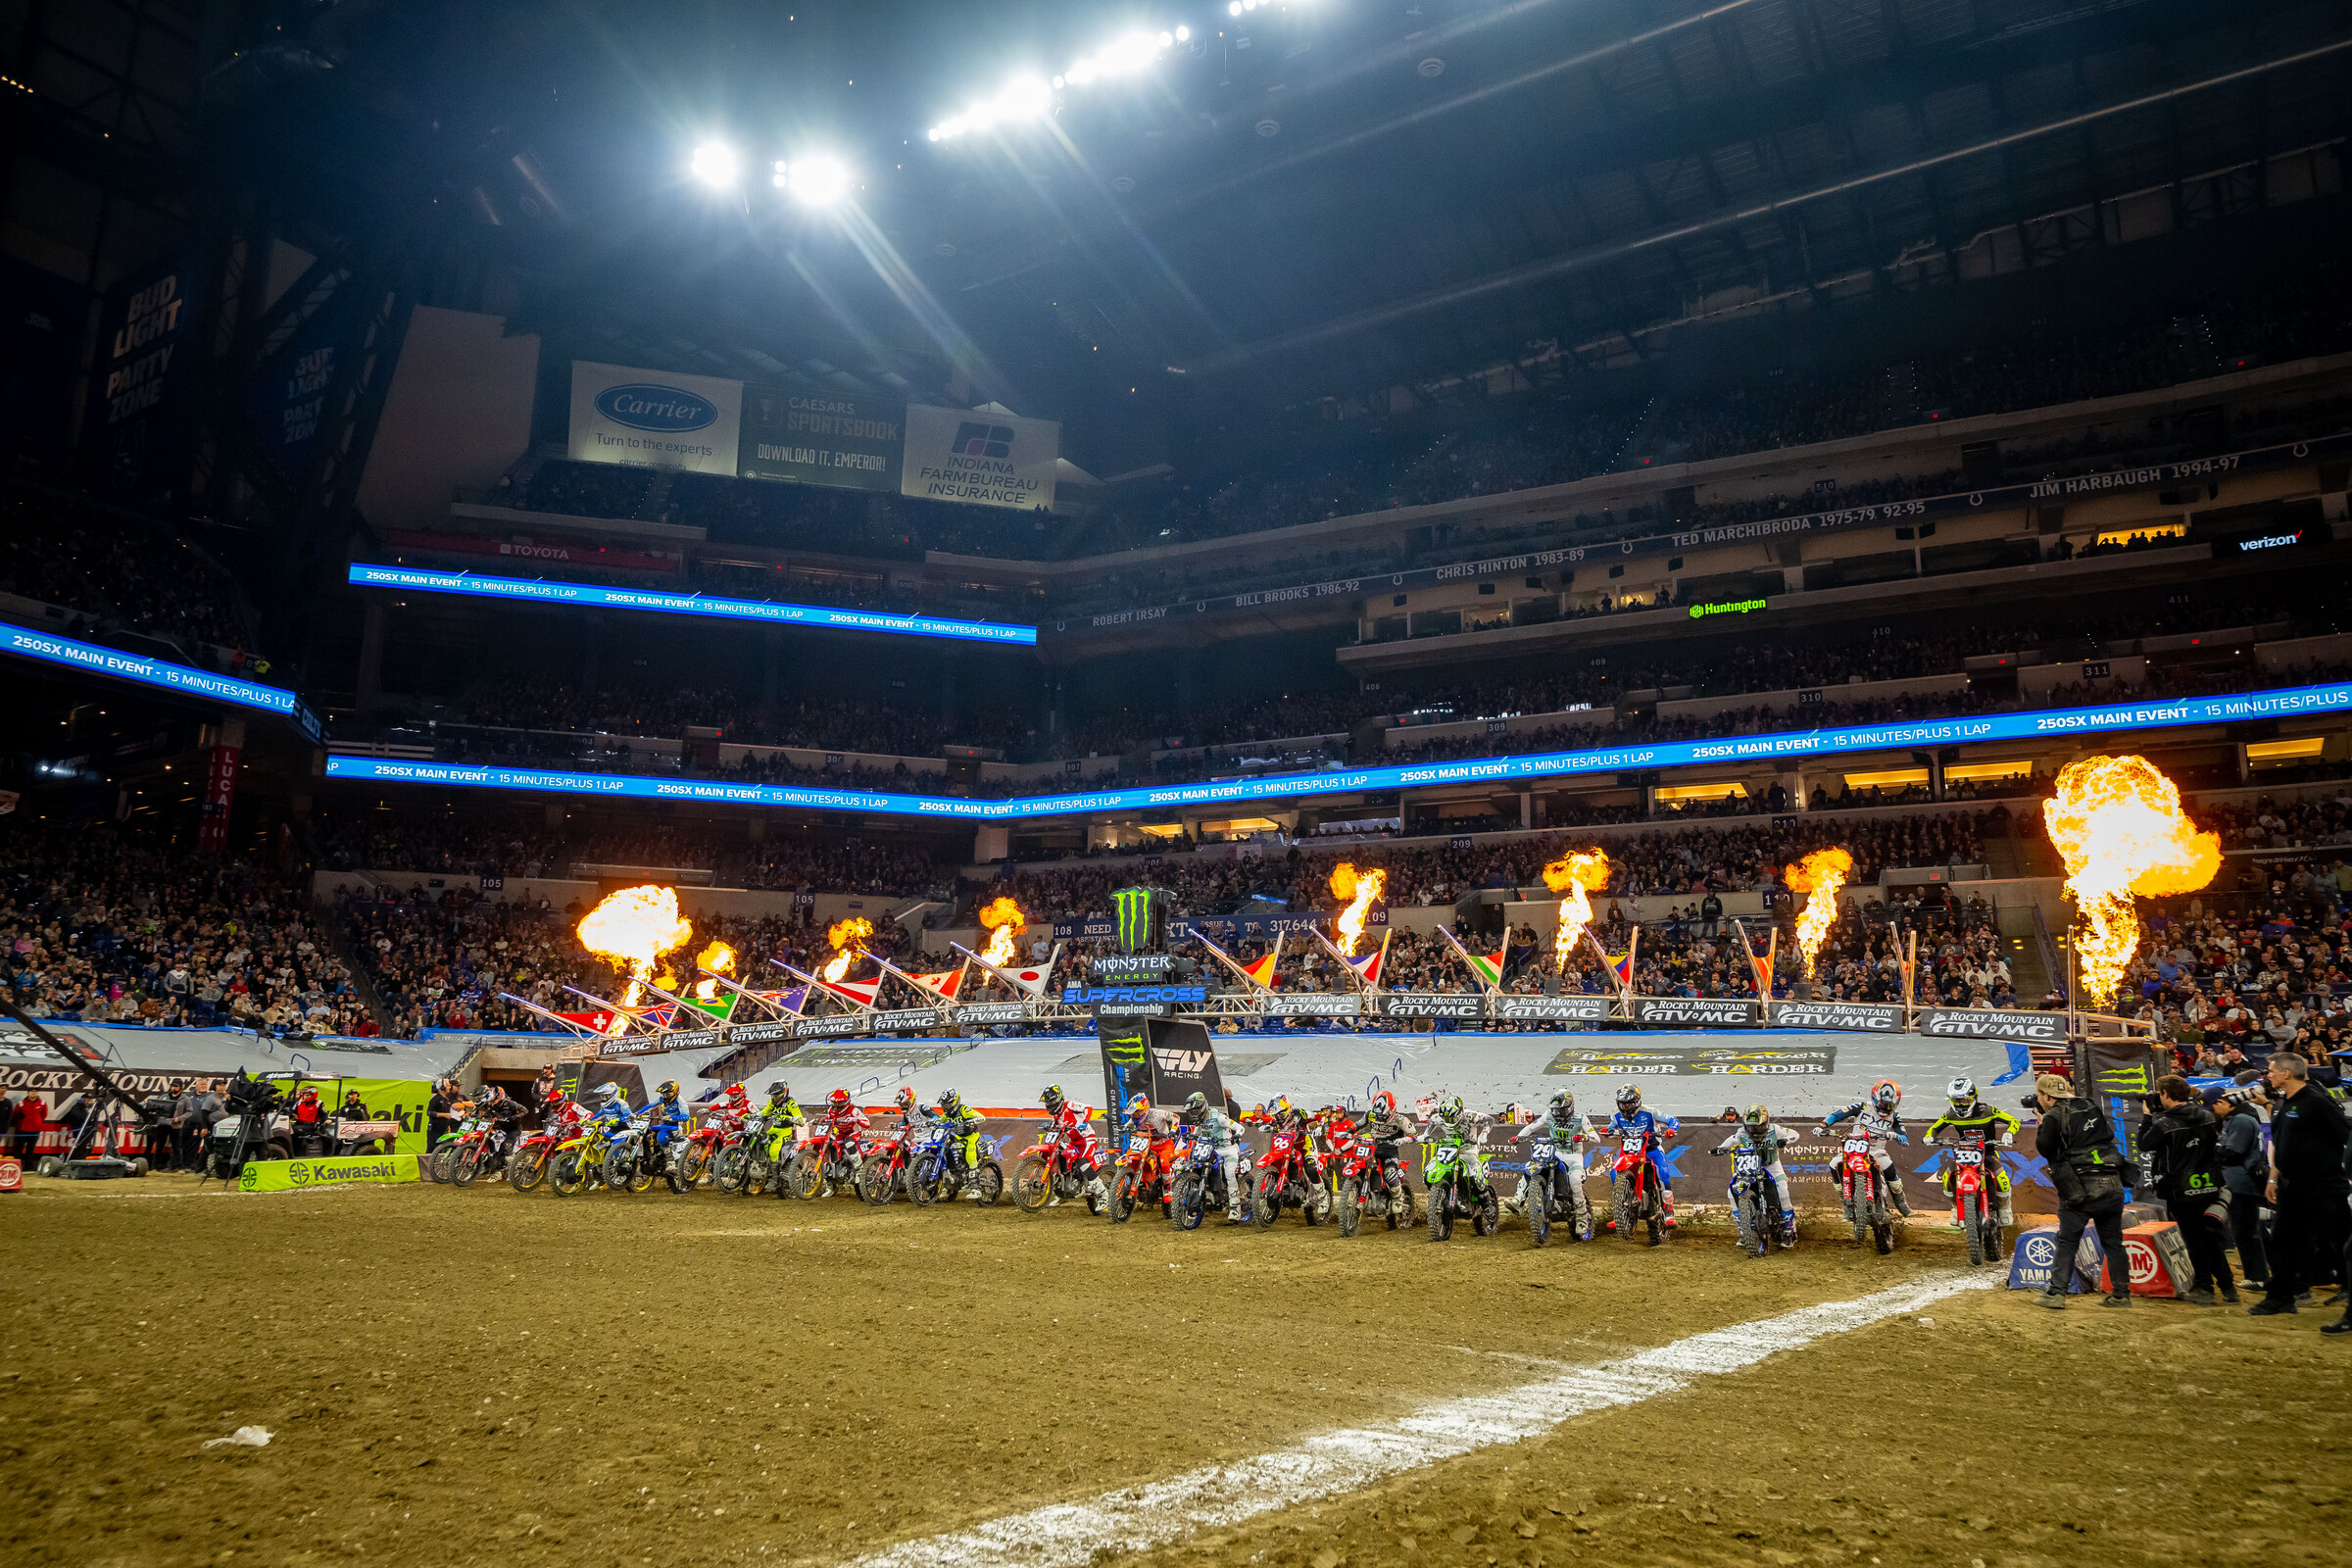  Look at: Indianapolis Supercross Primary Event Highlights & Outcomes